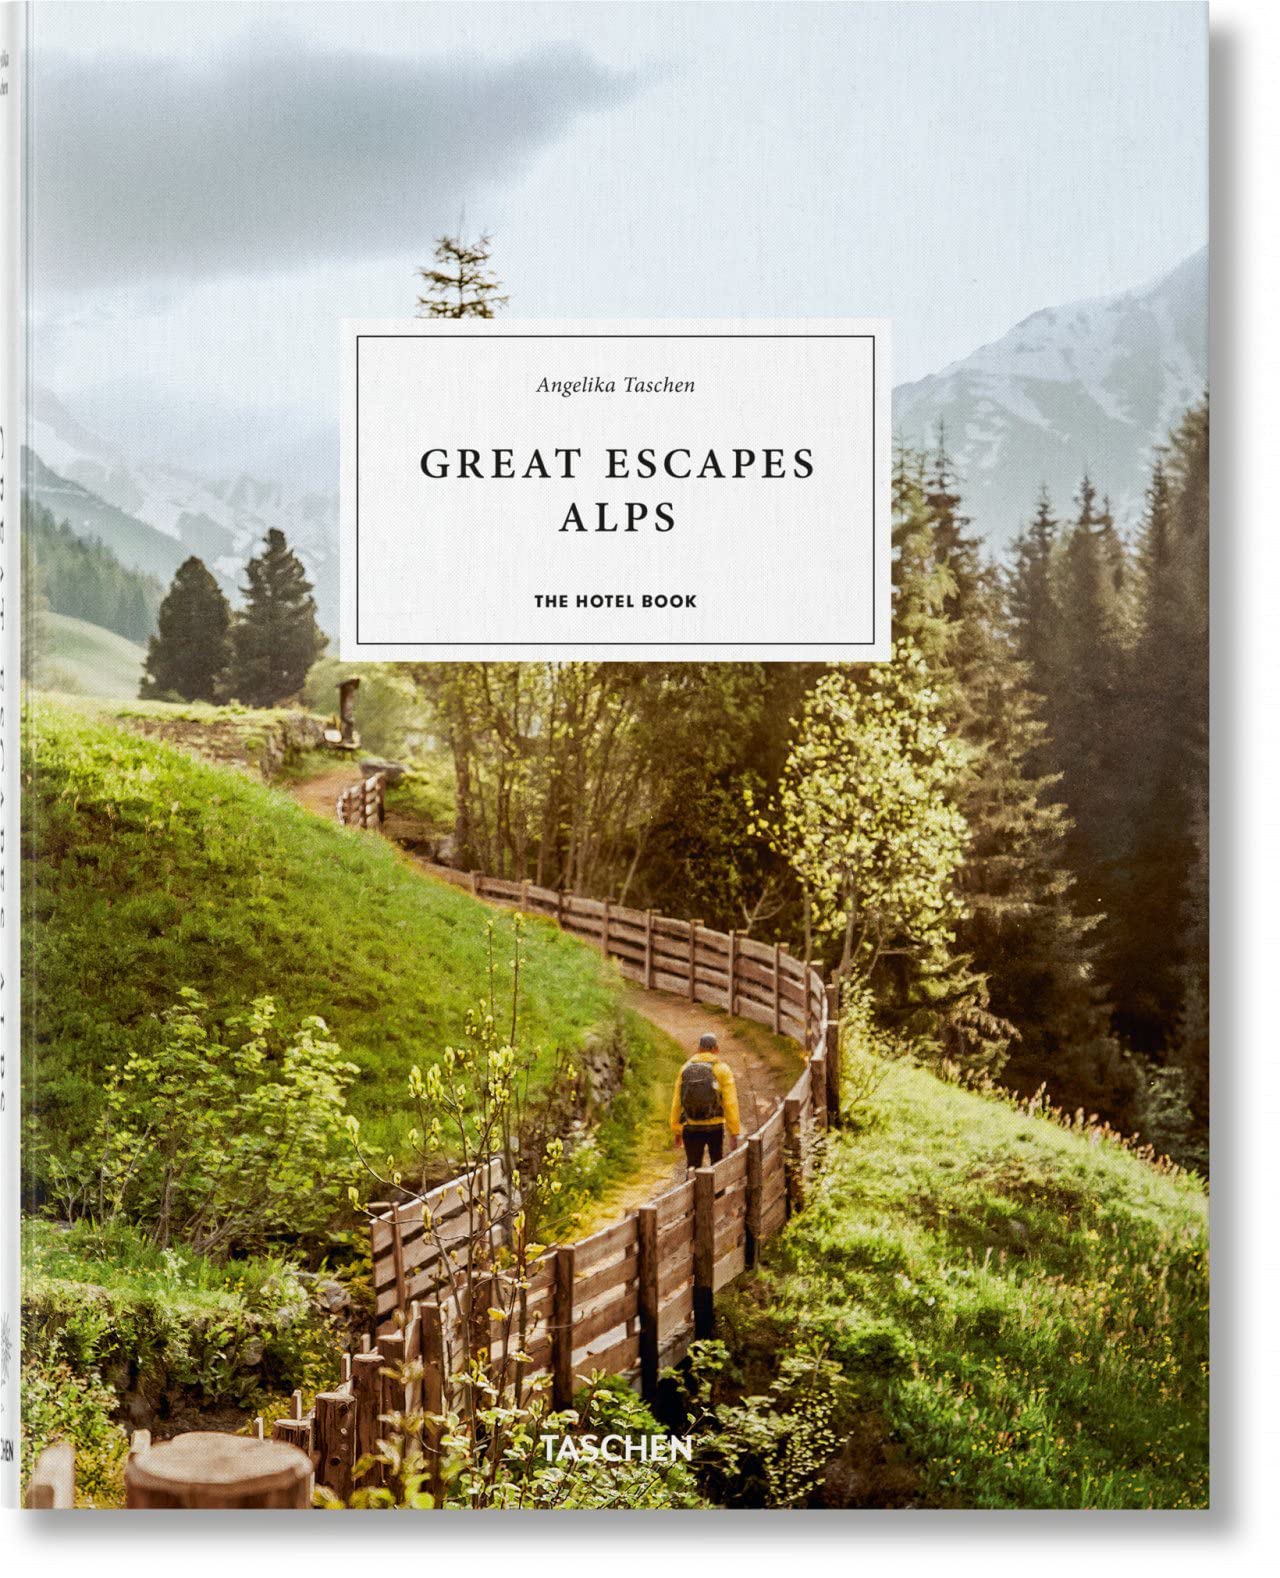 Great Escapes Alps. The Hotel Book where architects stay in germany